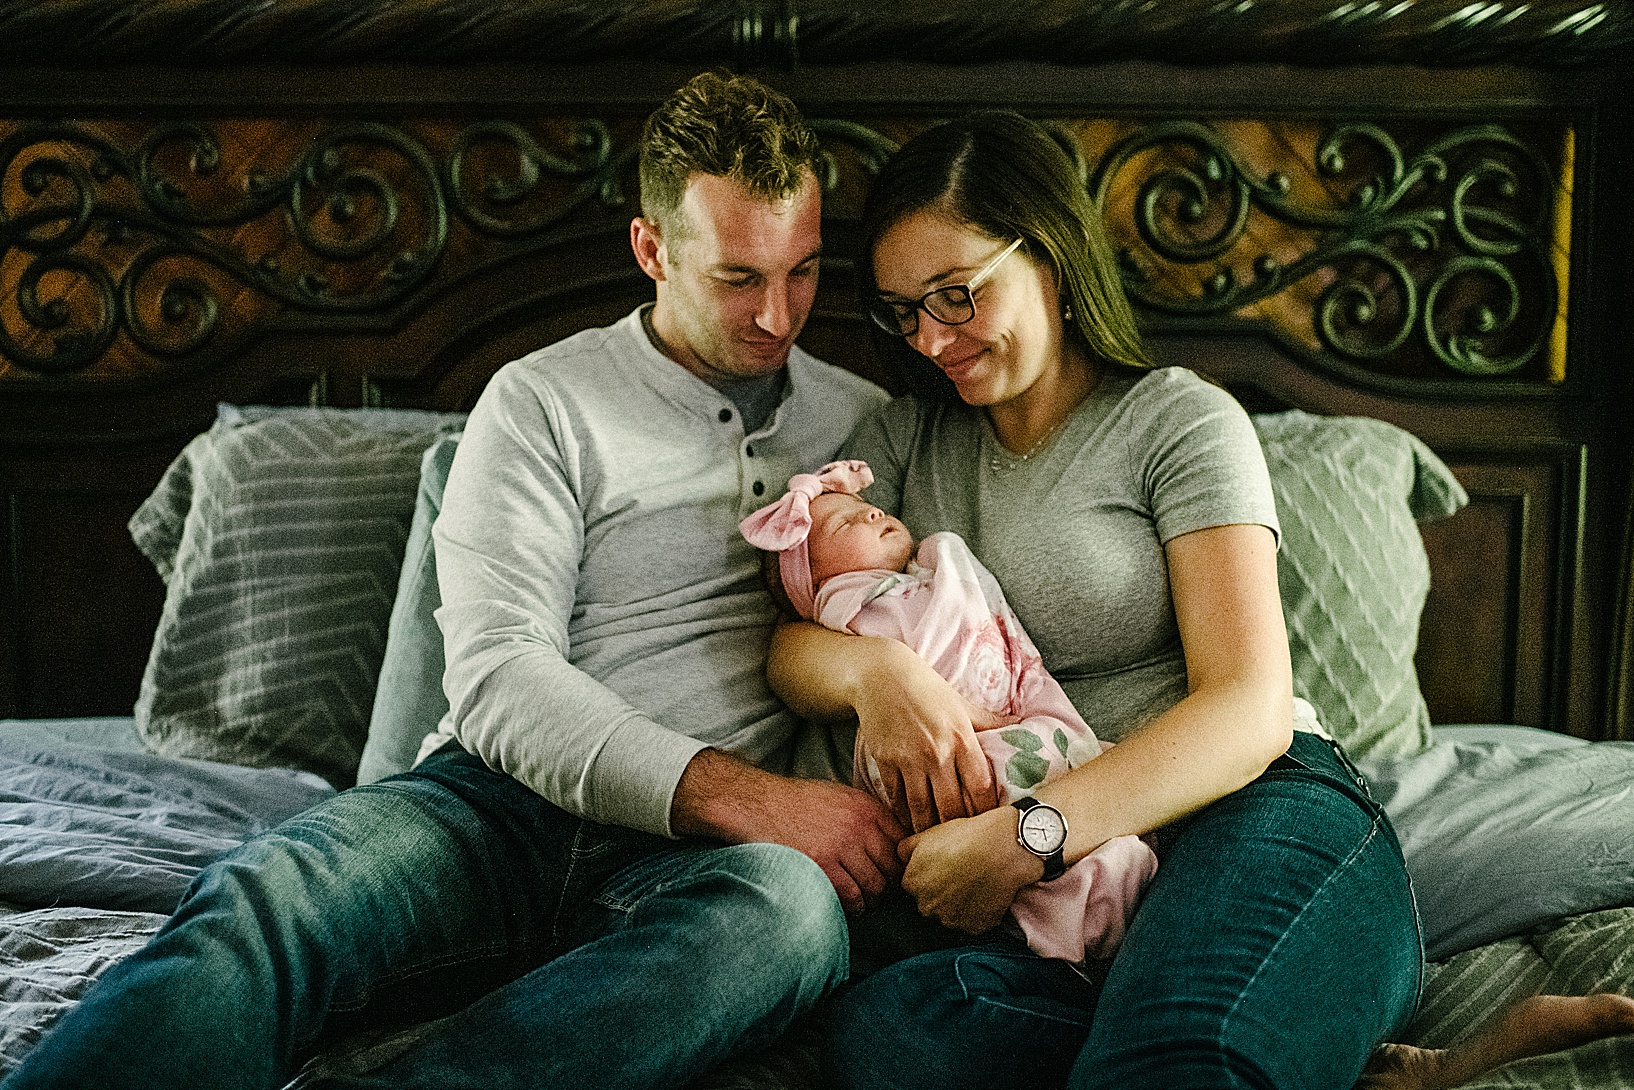 Woman and man cuddle newborn Baby Ava on their bed with beautiful iron headboard in background